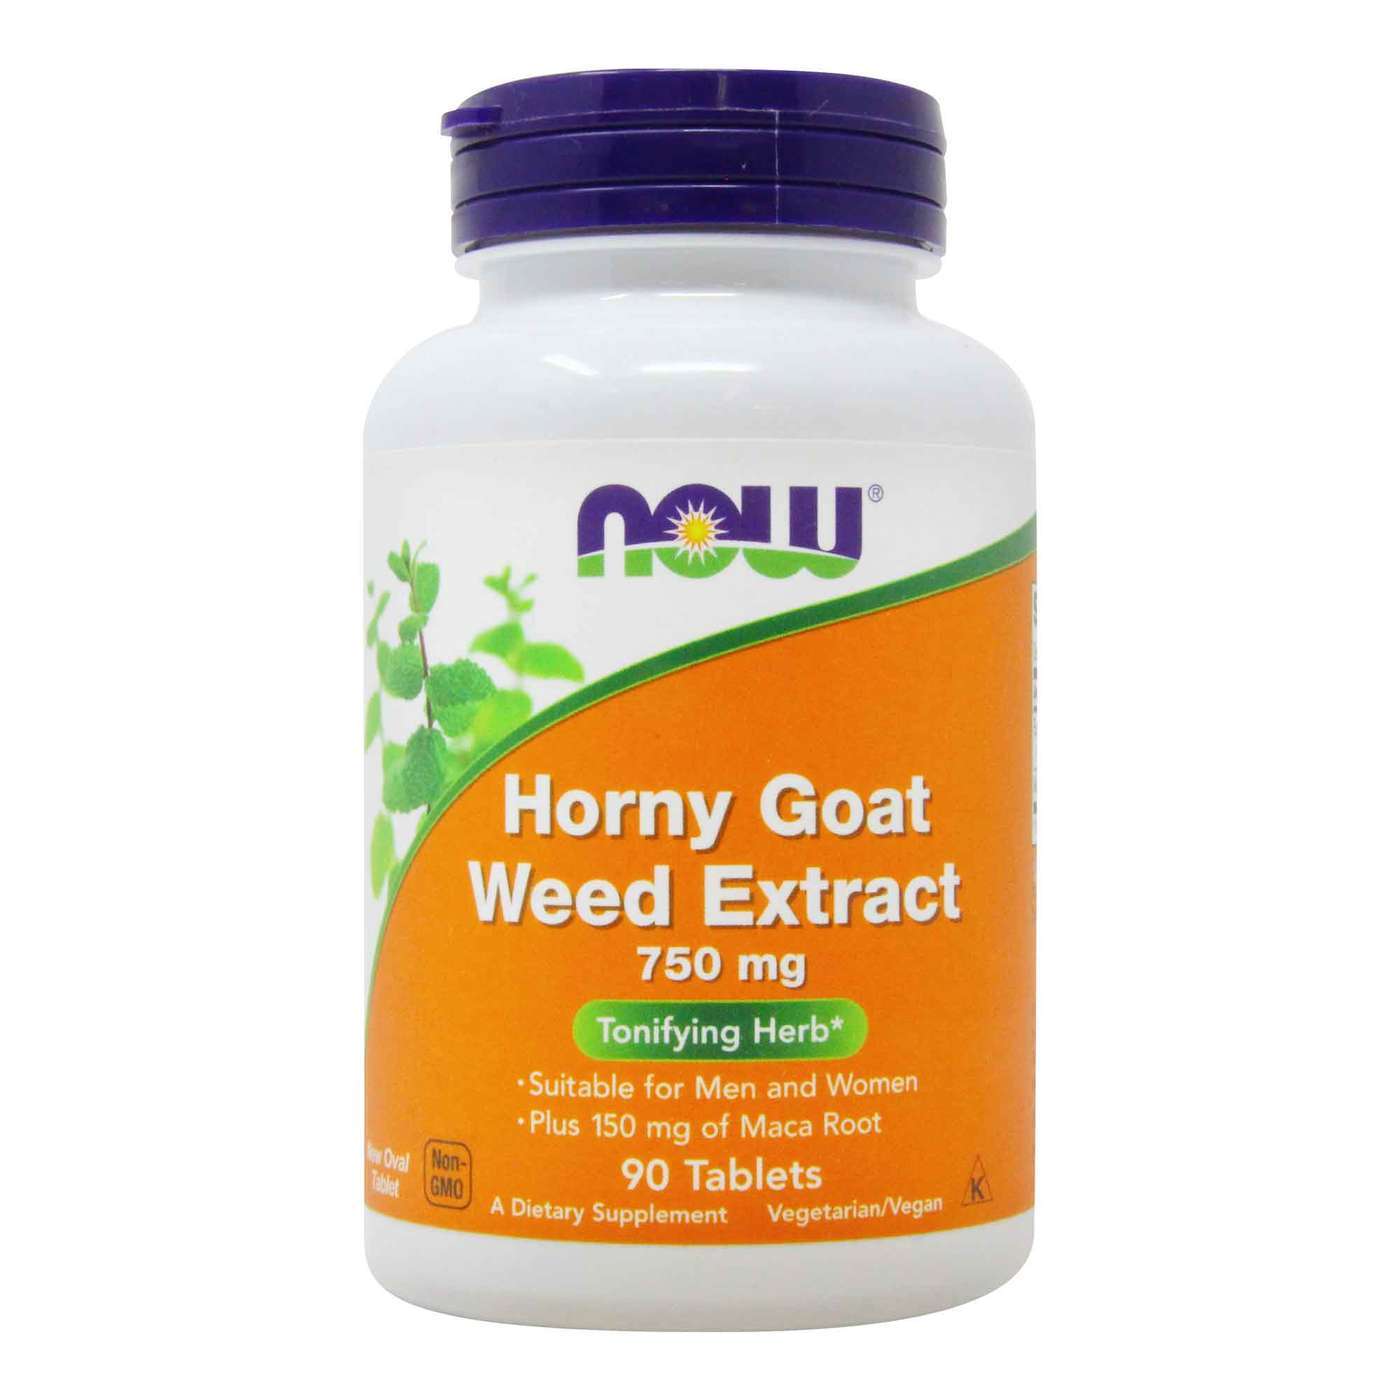 Horny Goat Weed Extract 1000mg Capsules britvits GB 